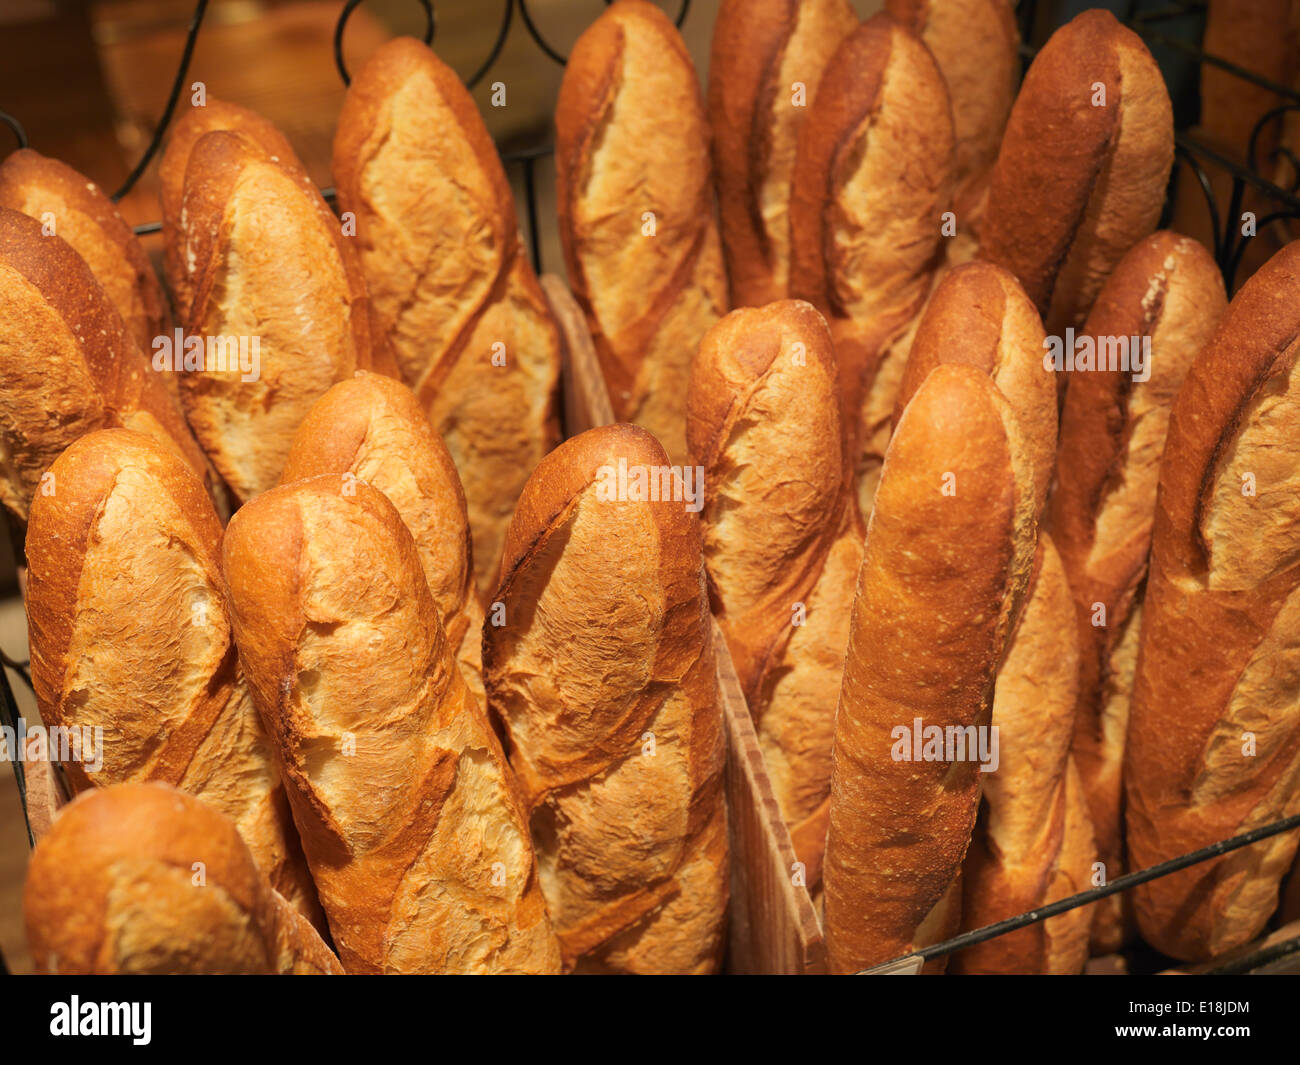 Baguettes, French bread loaves in a store in Japan Stock Photo